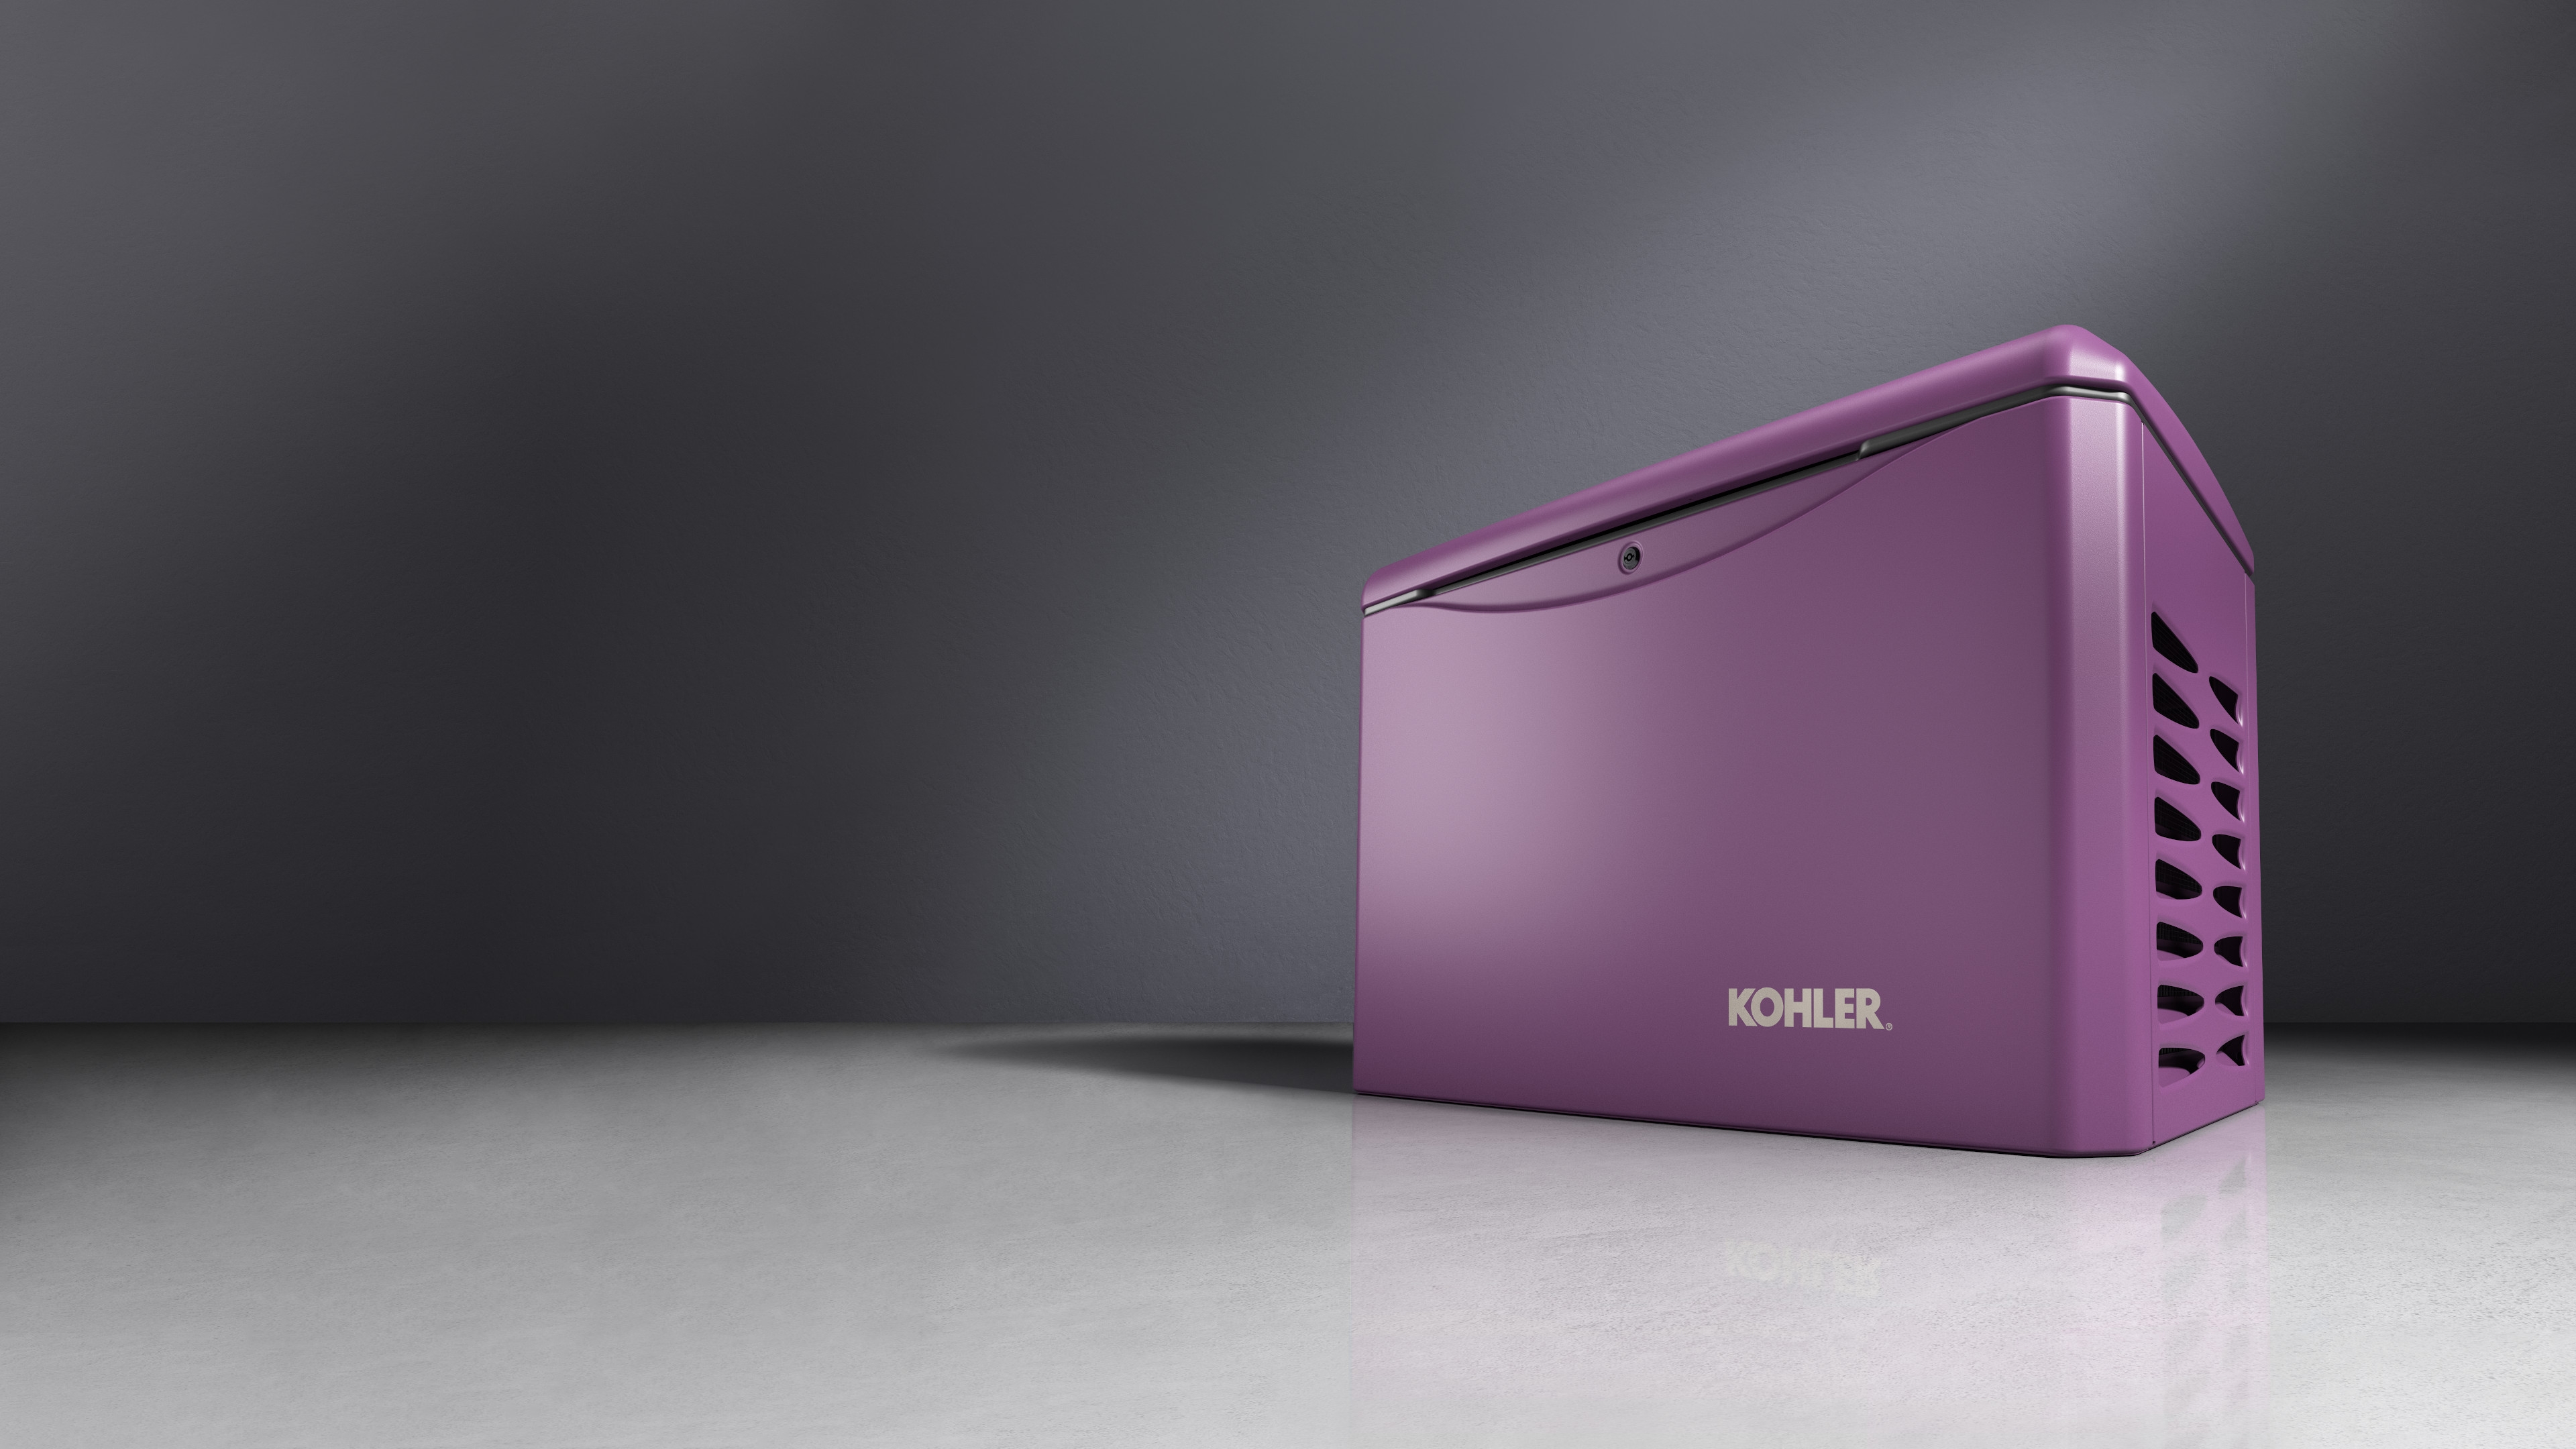 Royal Plum color Kohler residential generator with ventilated side panels, showcased against a gradient gray background.